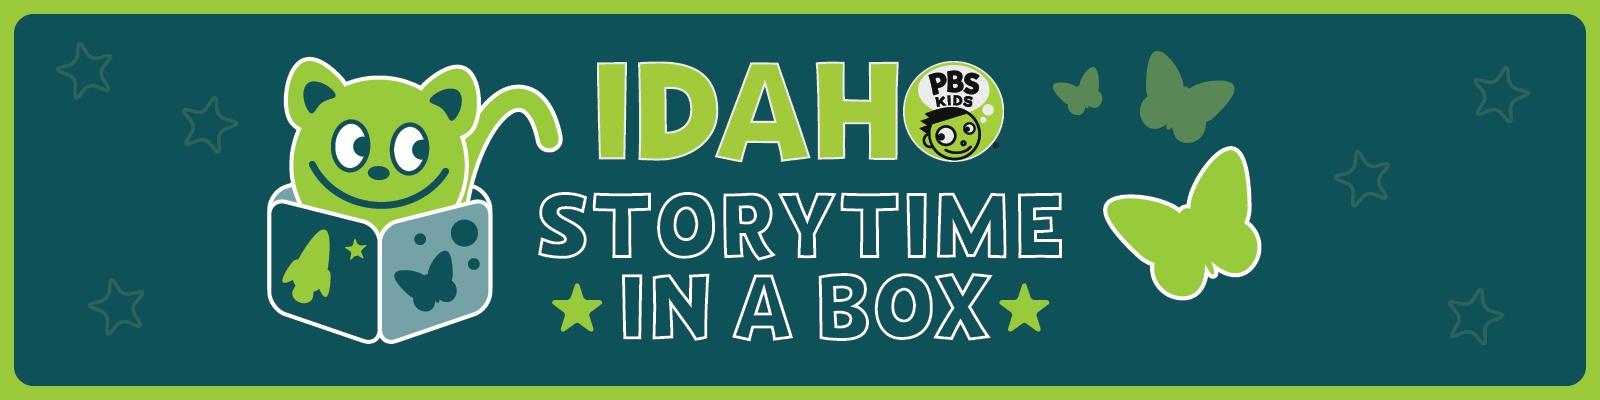 Idaho Storytime in a Box